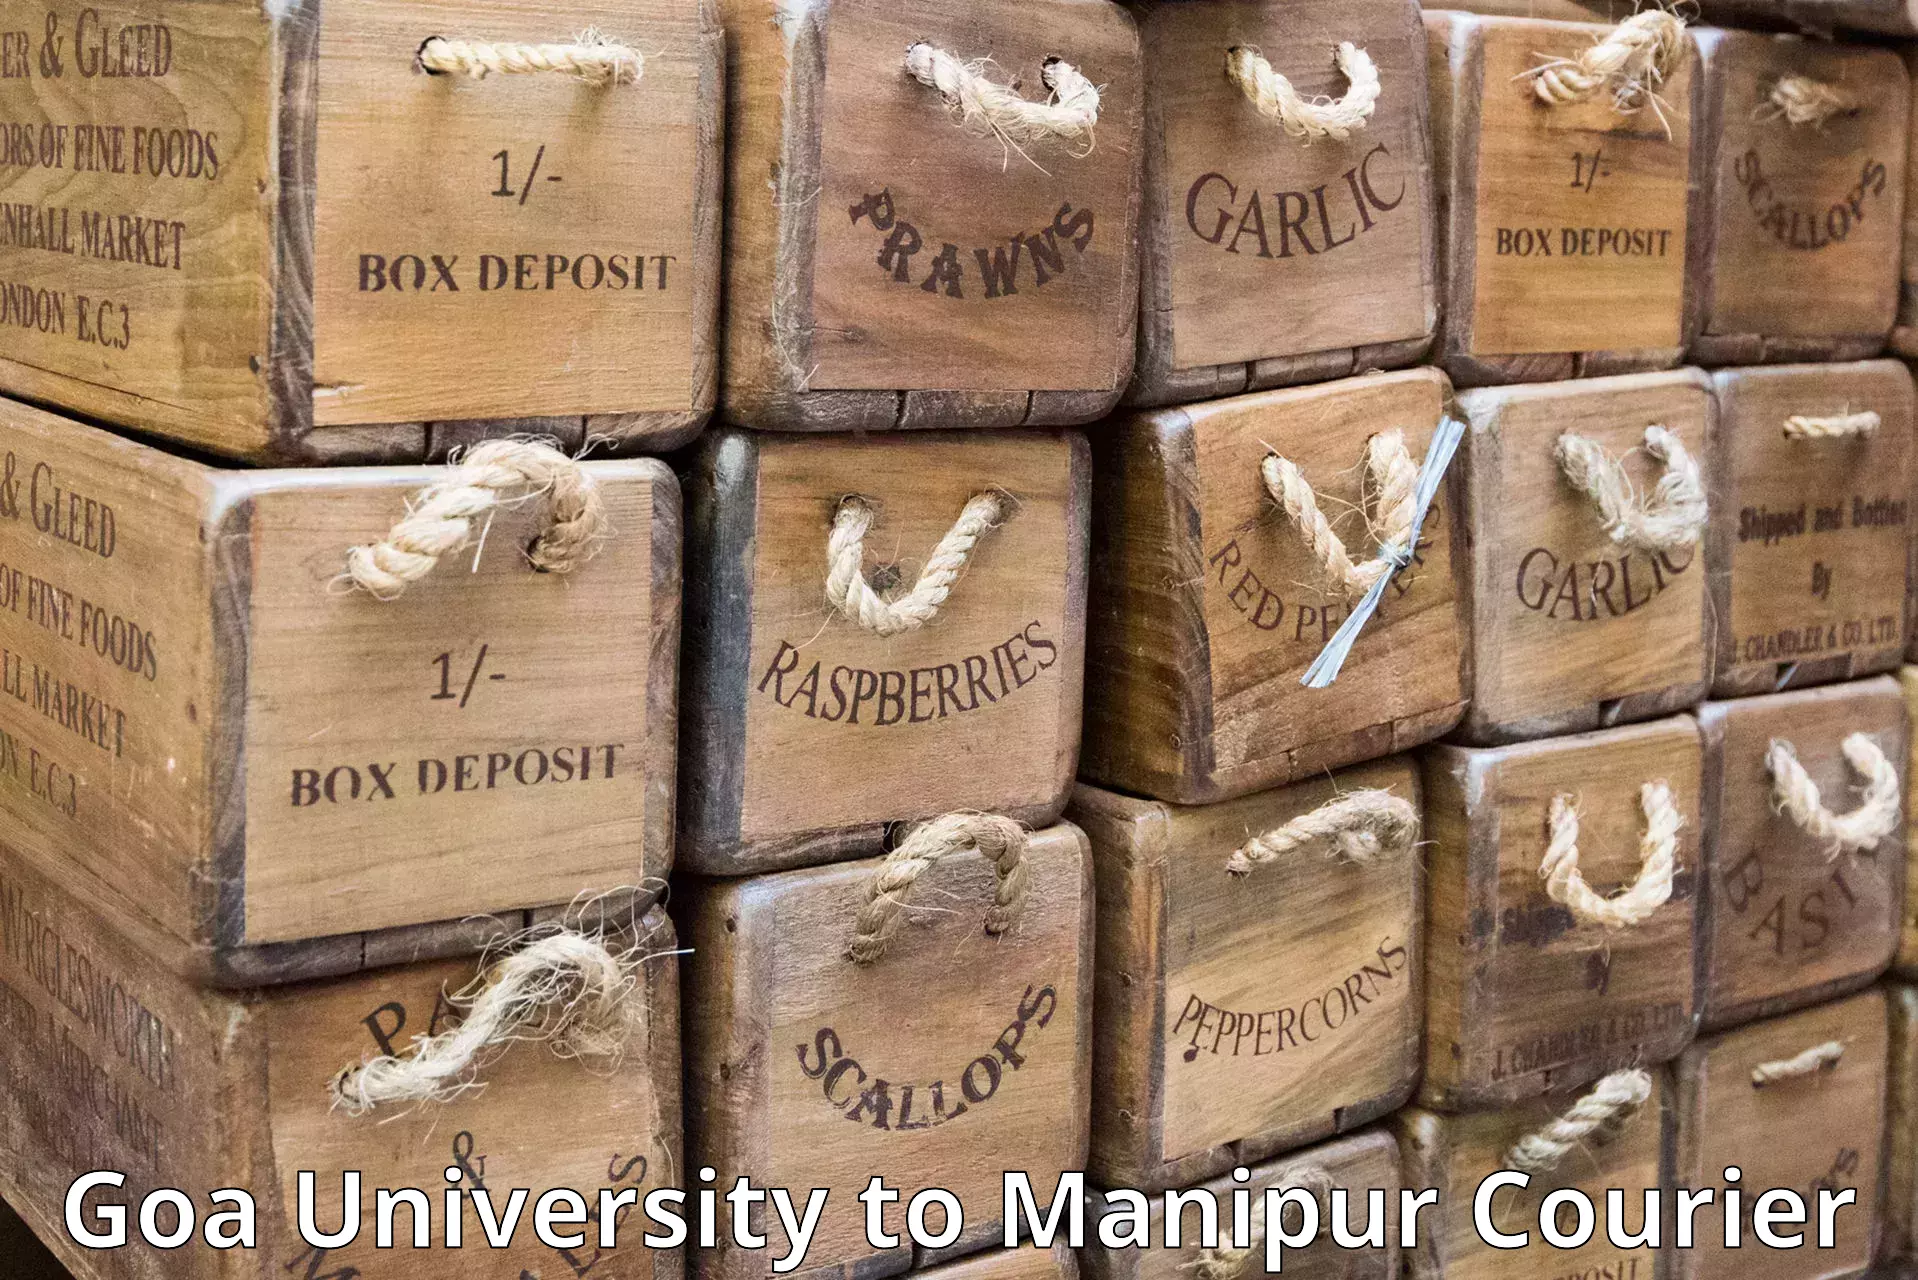 Efficient shipping operations Goa University to Imphal